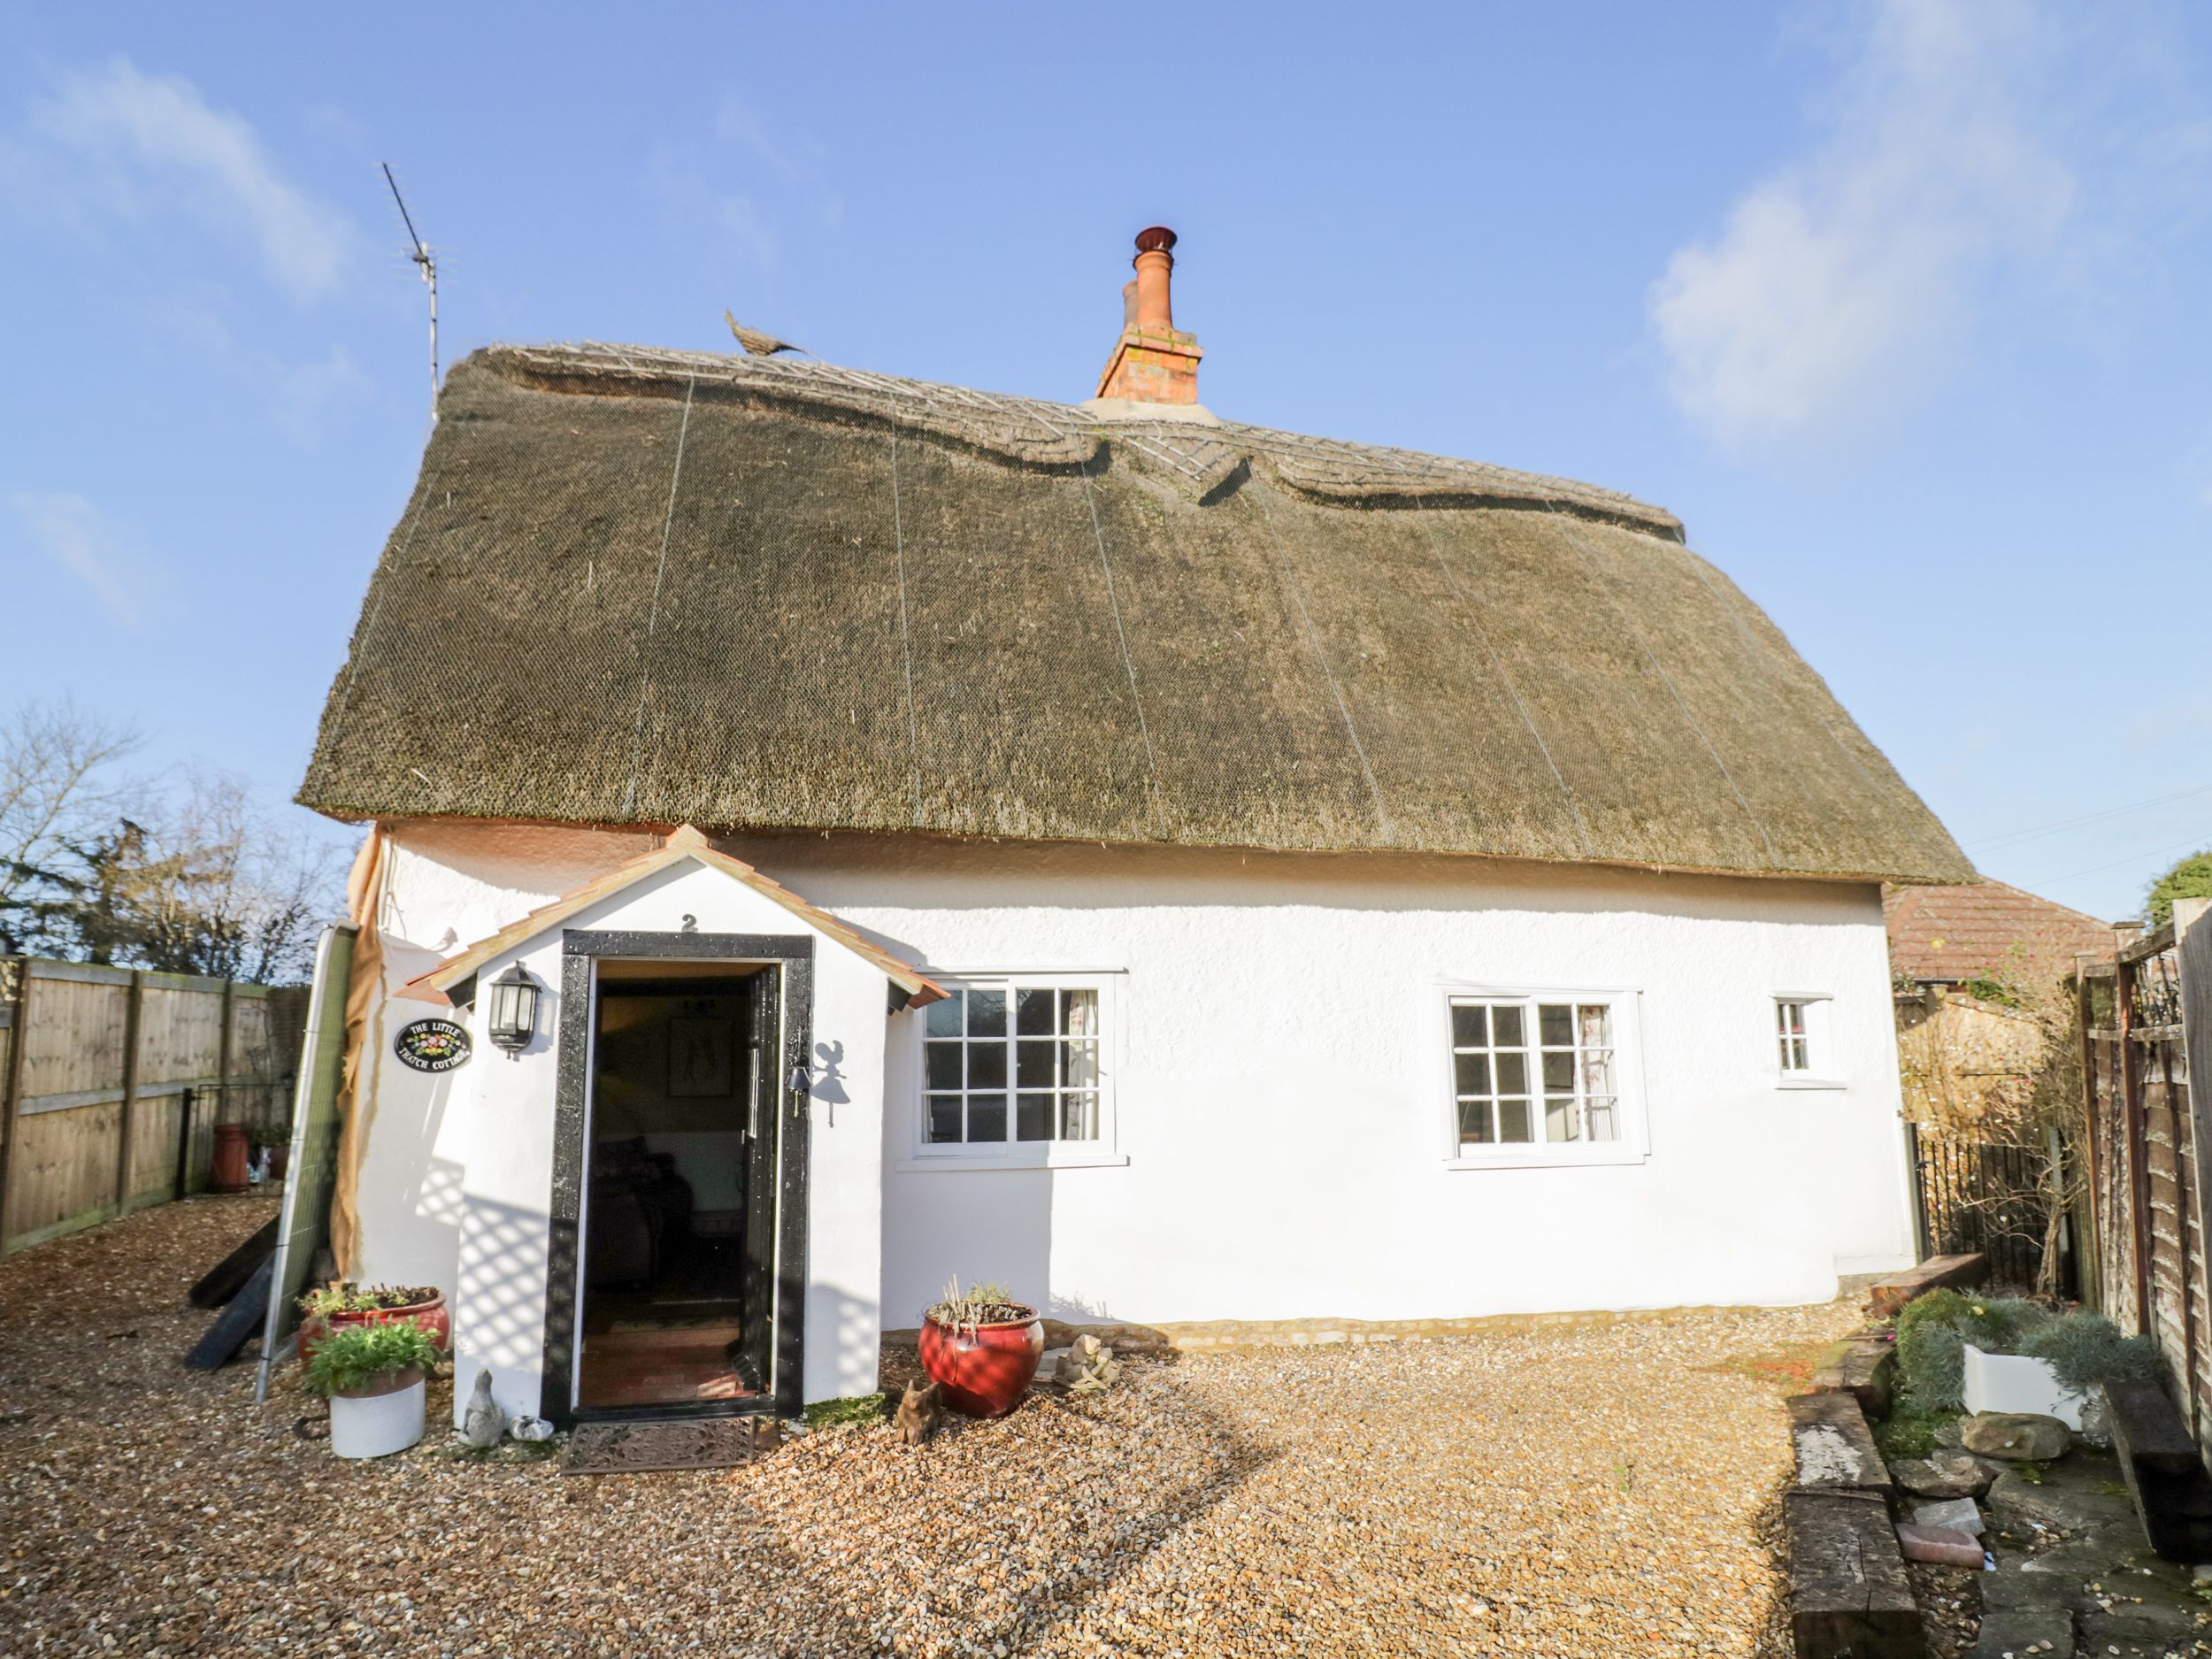 Dogfriendly The Little Thatch Cottage, Bedfordshire